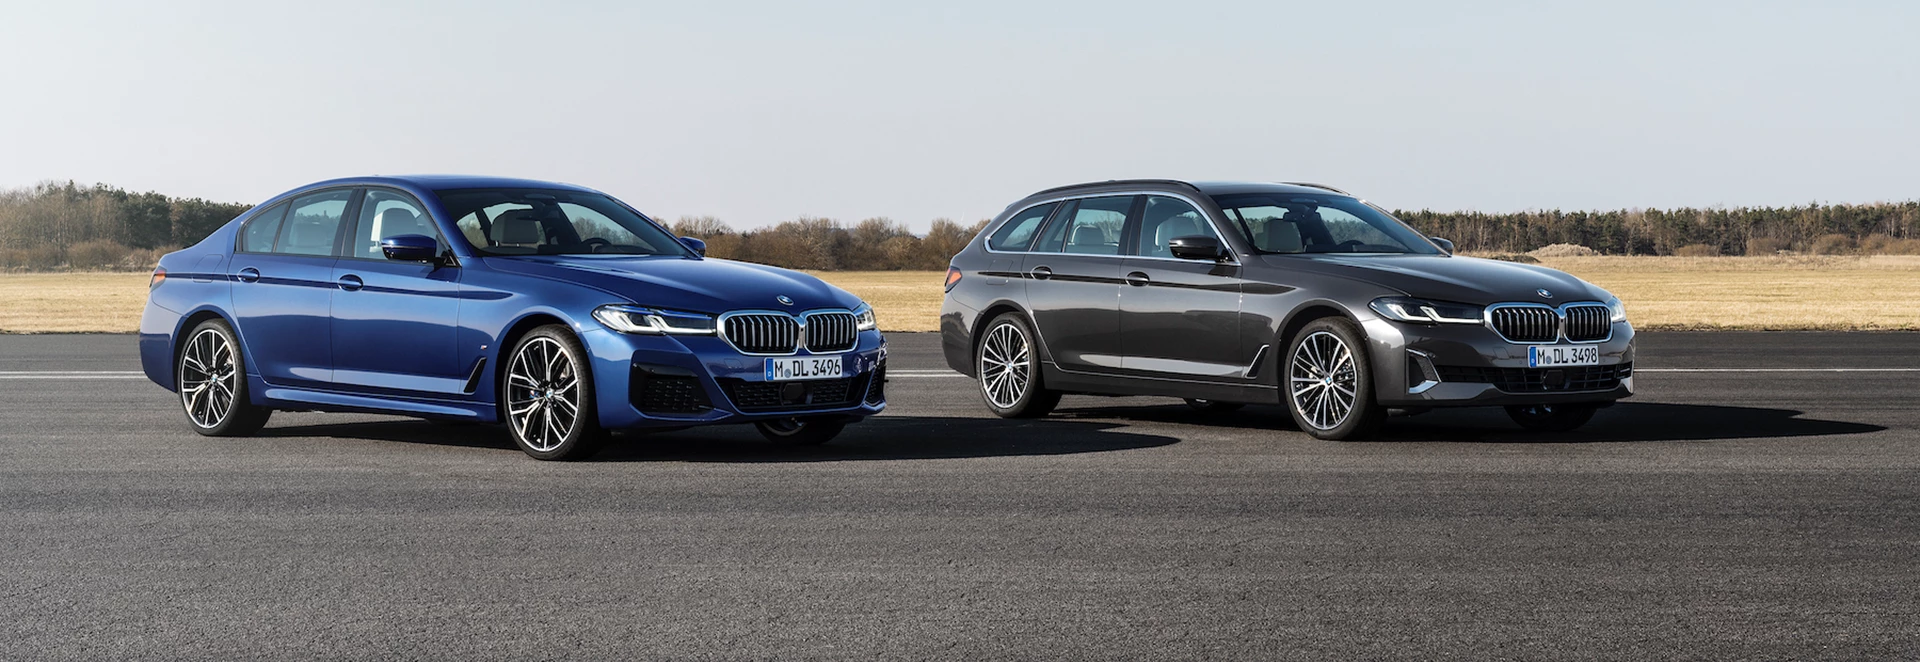 2020 BMW 5 Series: What’s new? 